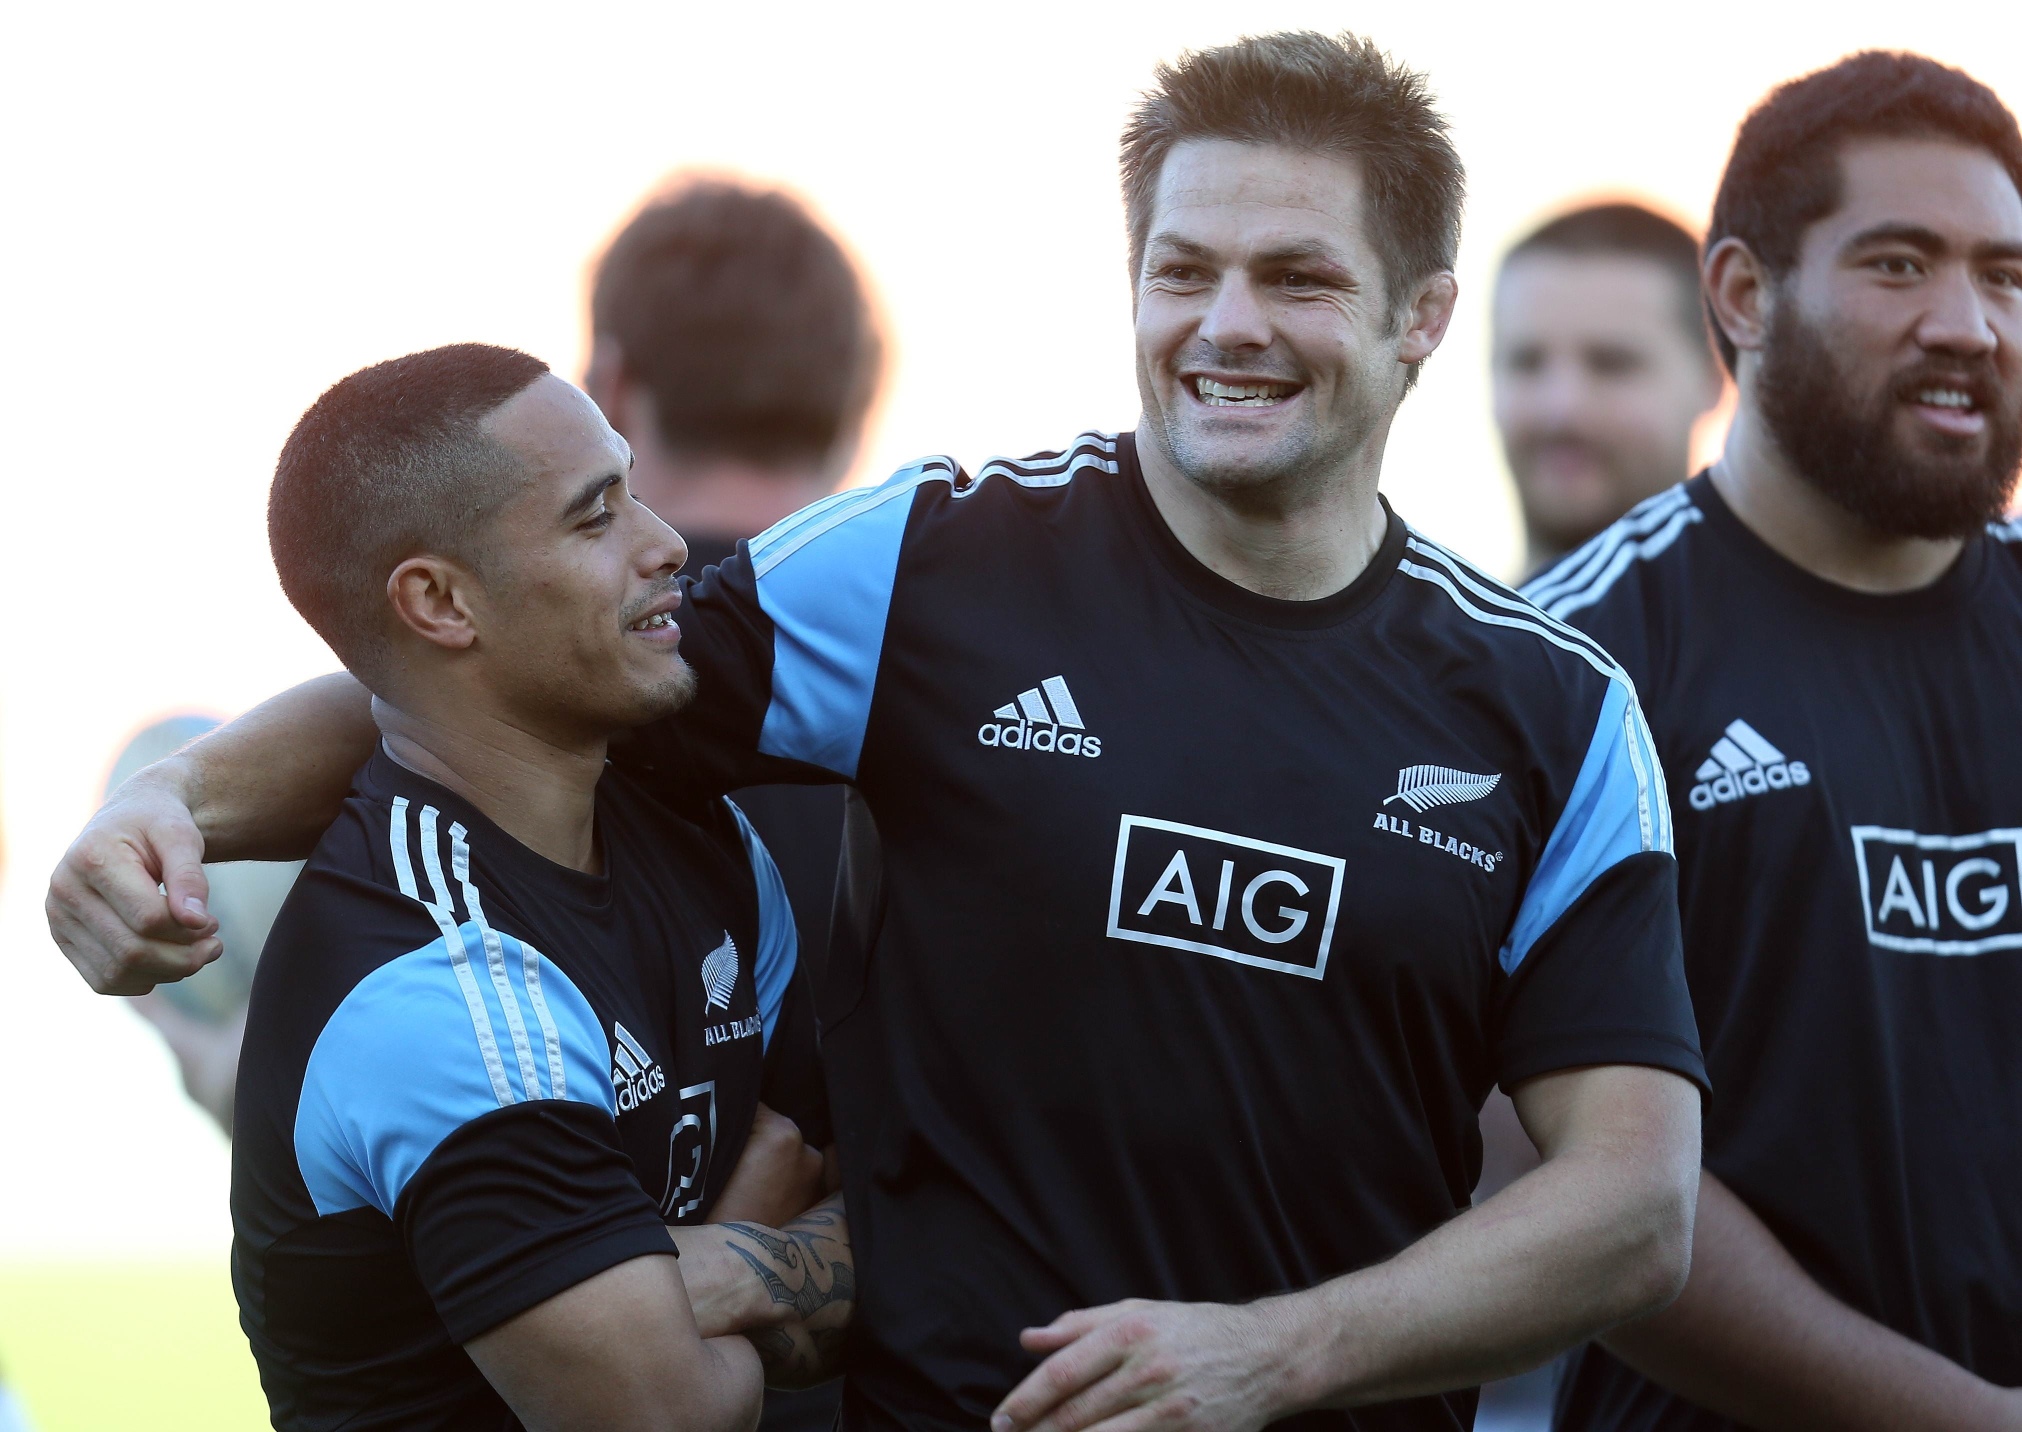 New Zealand All Black's halfback Aaron Smith (L) and captain Richie McCaw. Photo: AFP